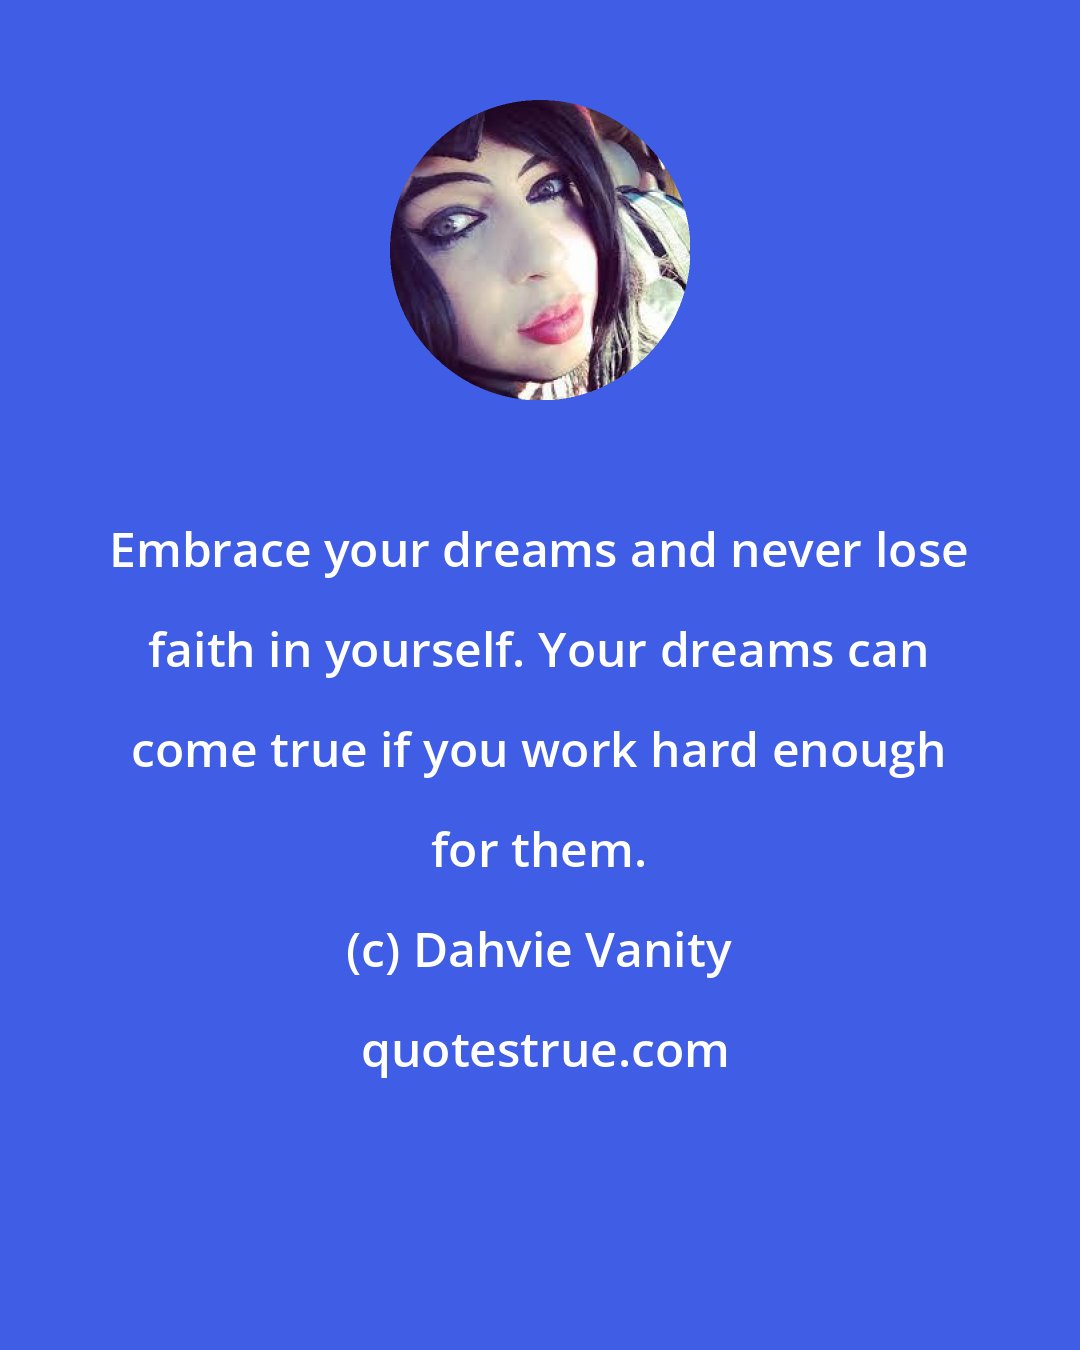 Dahvie Vanity: Embrace your dreams and never lose faith in yourself. Your dreams can come true if you work hard enough for them.